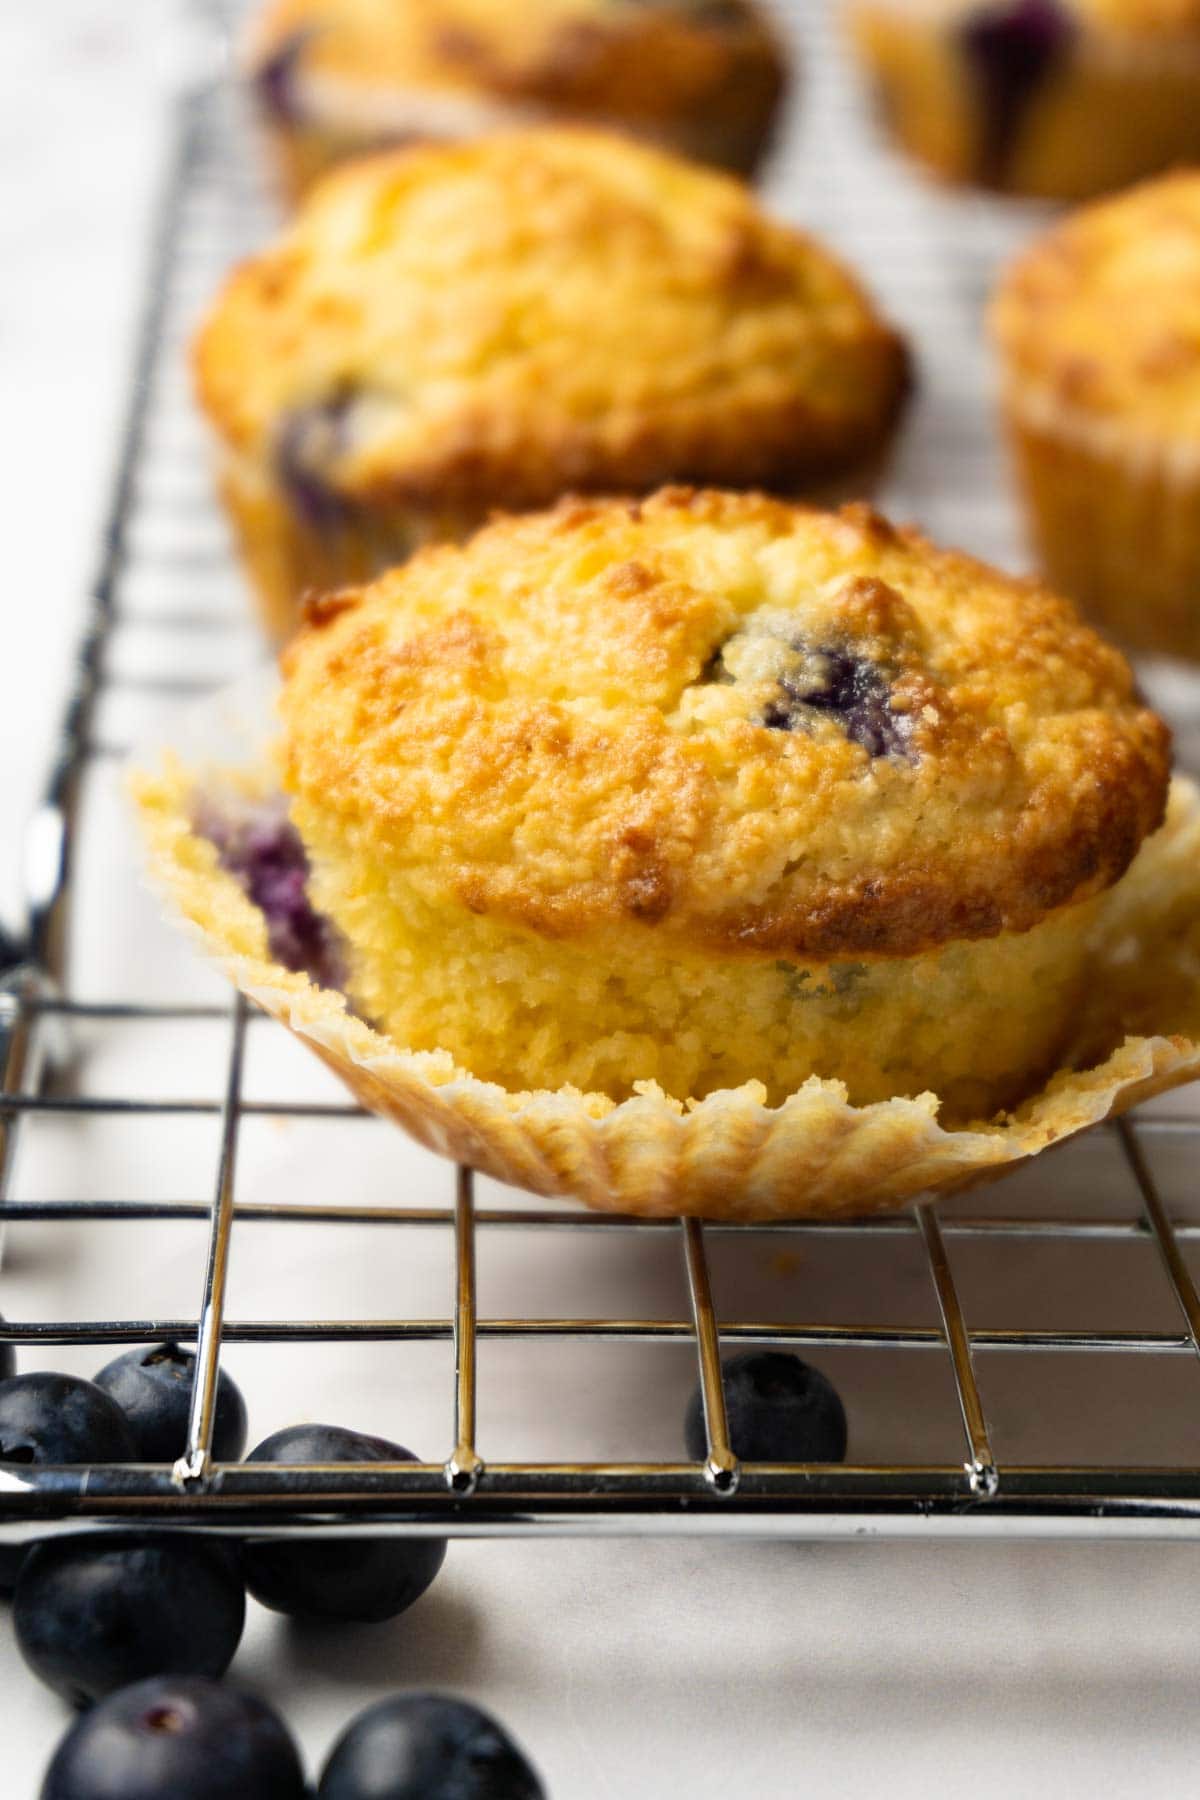 Blueberry muffin on a cooling rack. muffin liner is partially pealed, fresh blueberries are lying around.